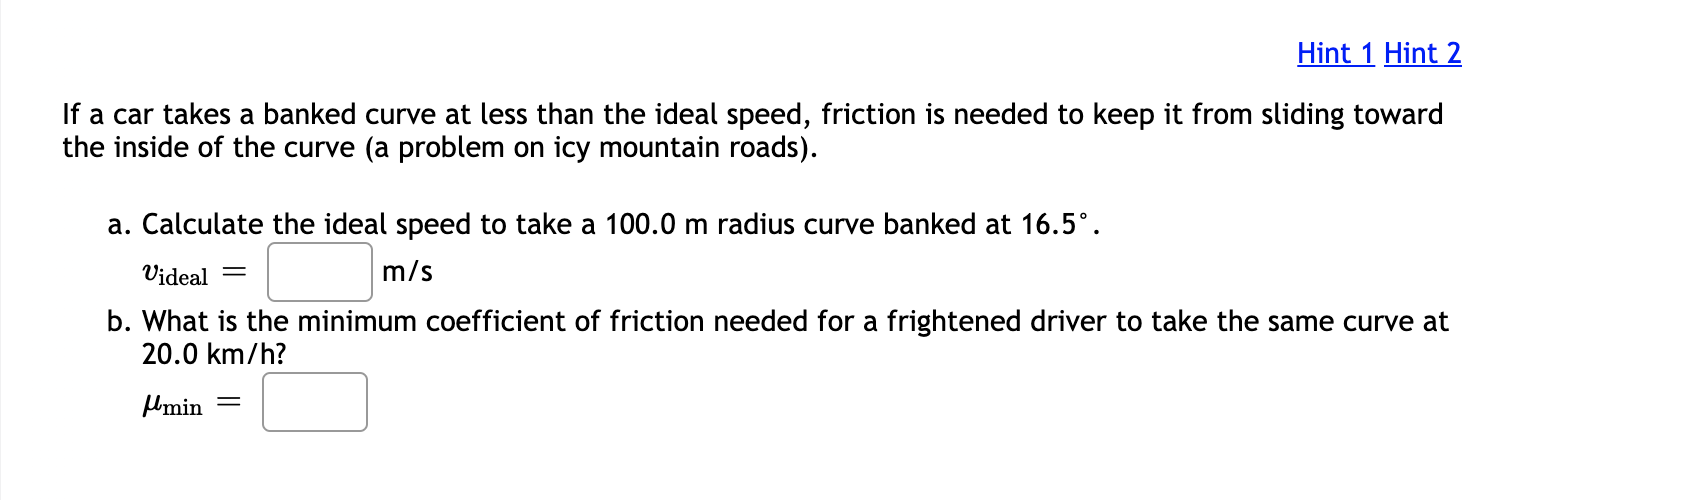 If A Car Takes A Banked Curve At Less Than The Ideal Speed Friction Is Needed To Keep It From Sliding Toward The Inside 1